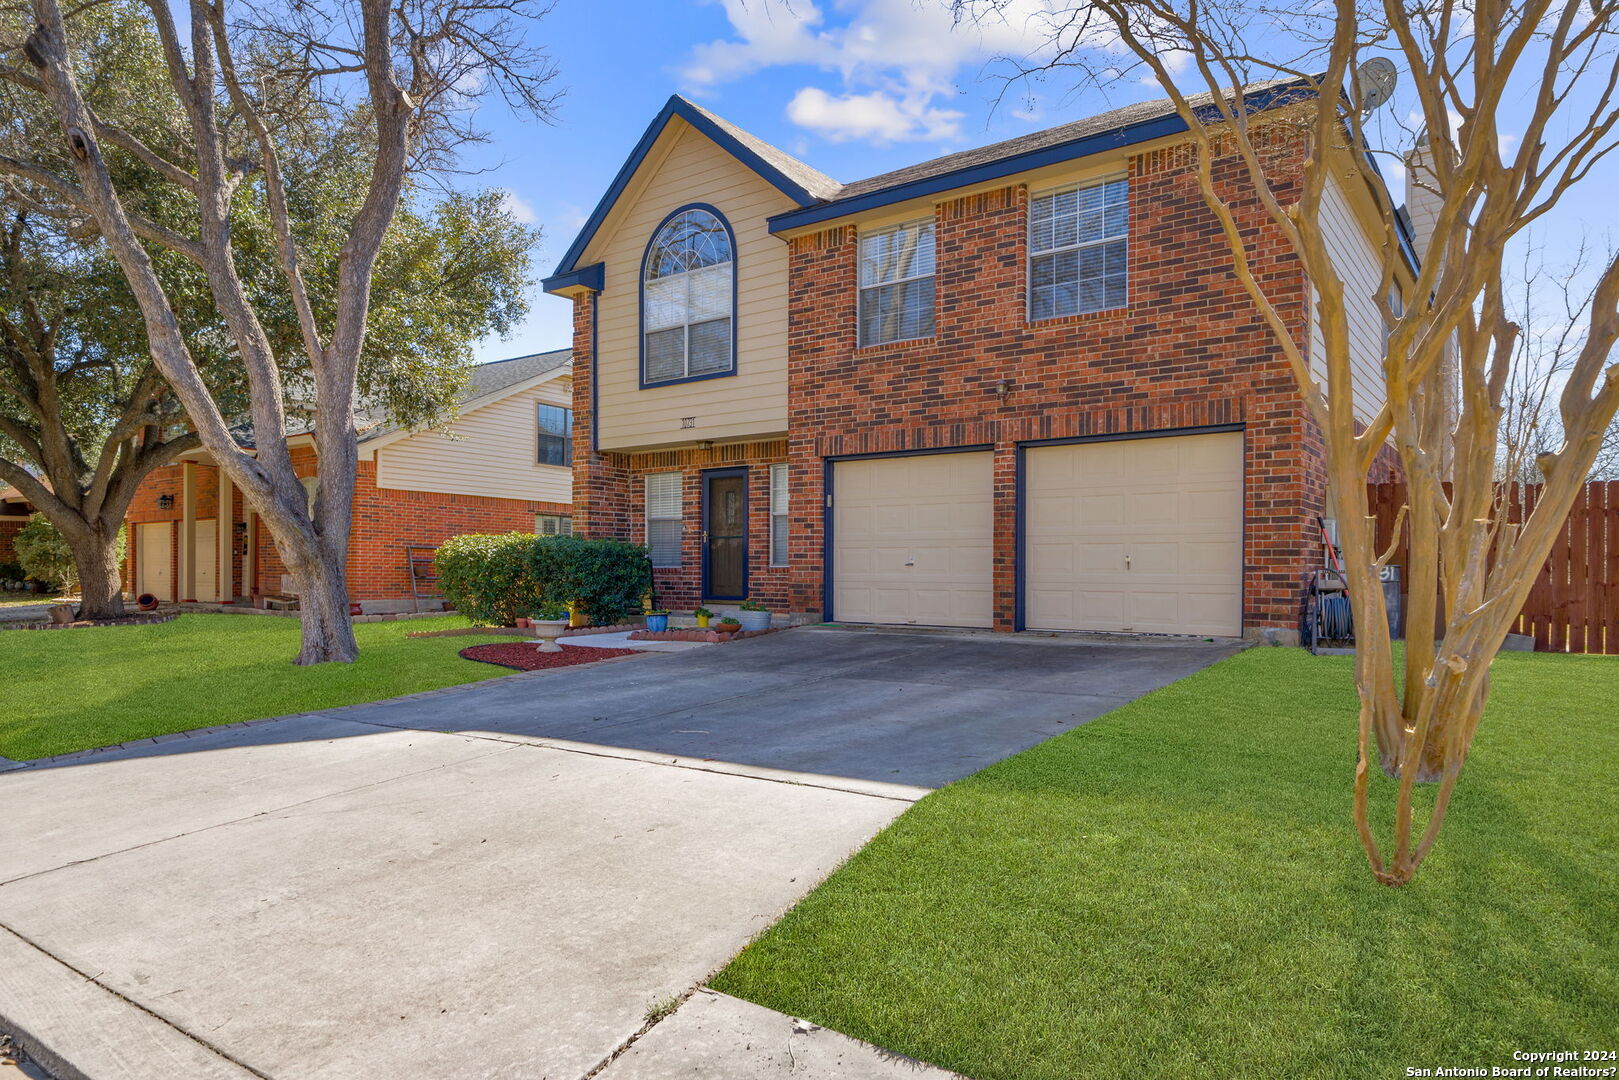 Photo of 10731 Laurel Crk in Converse, TX